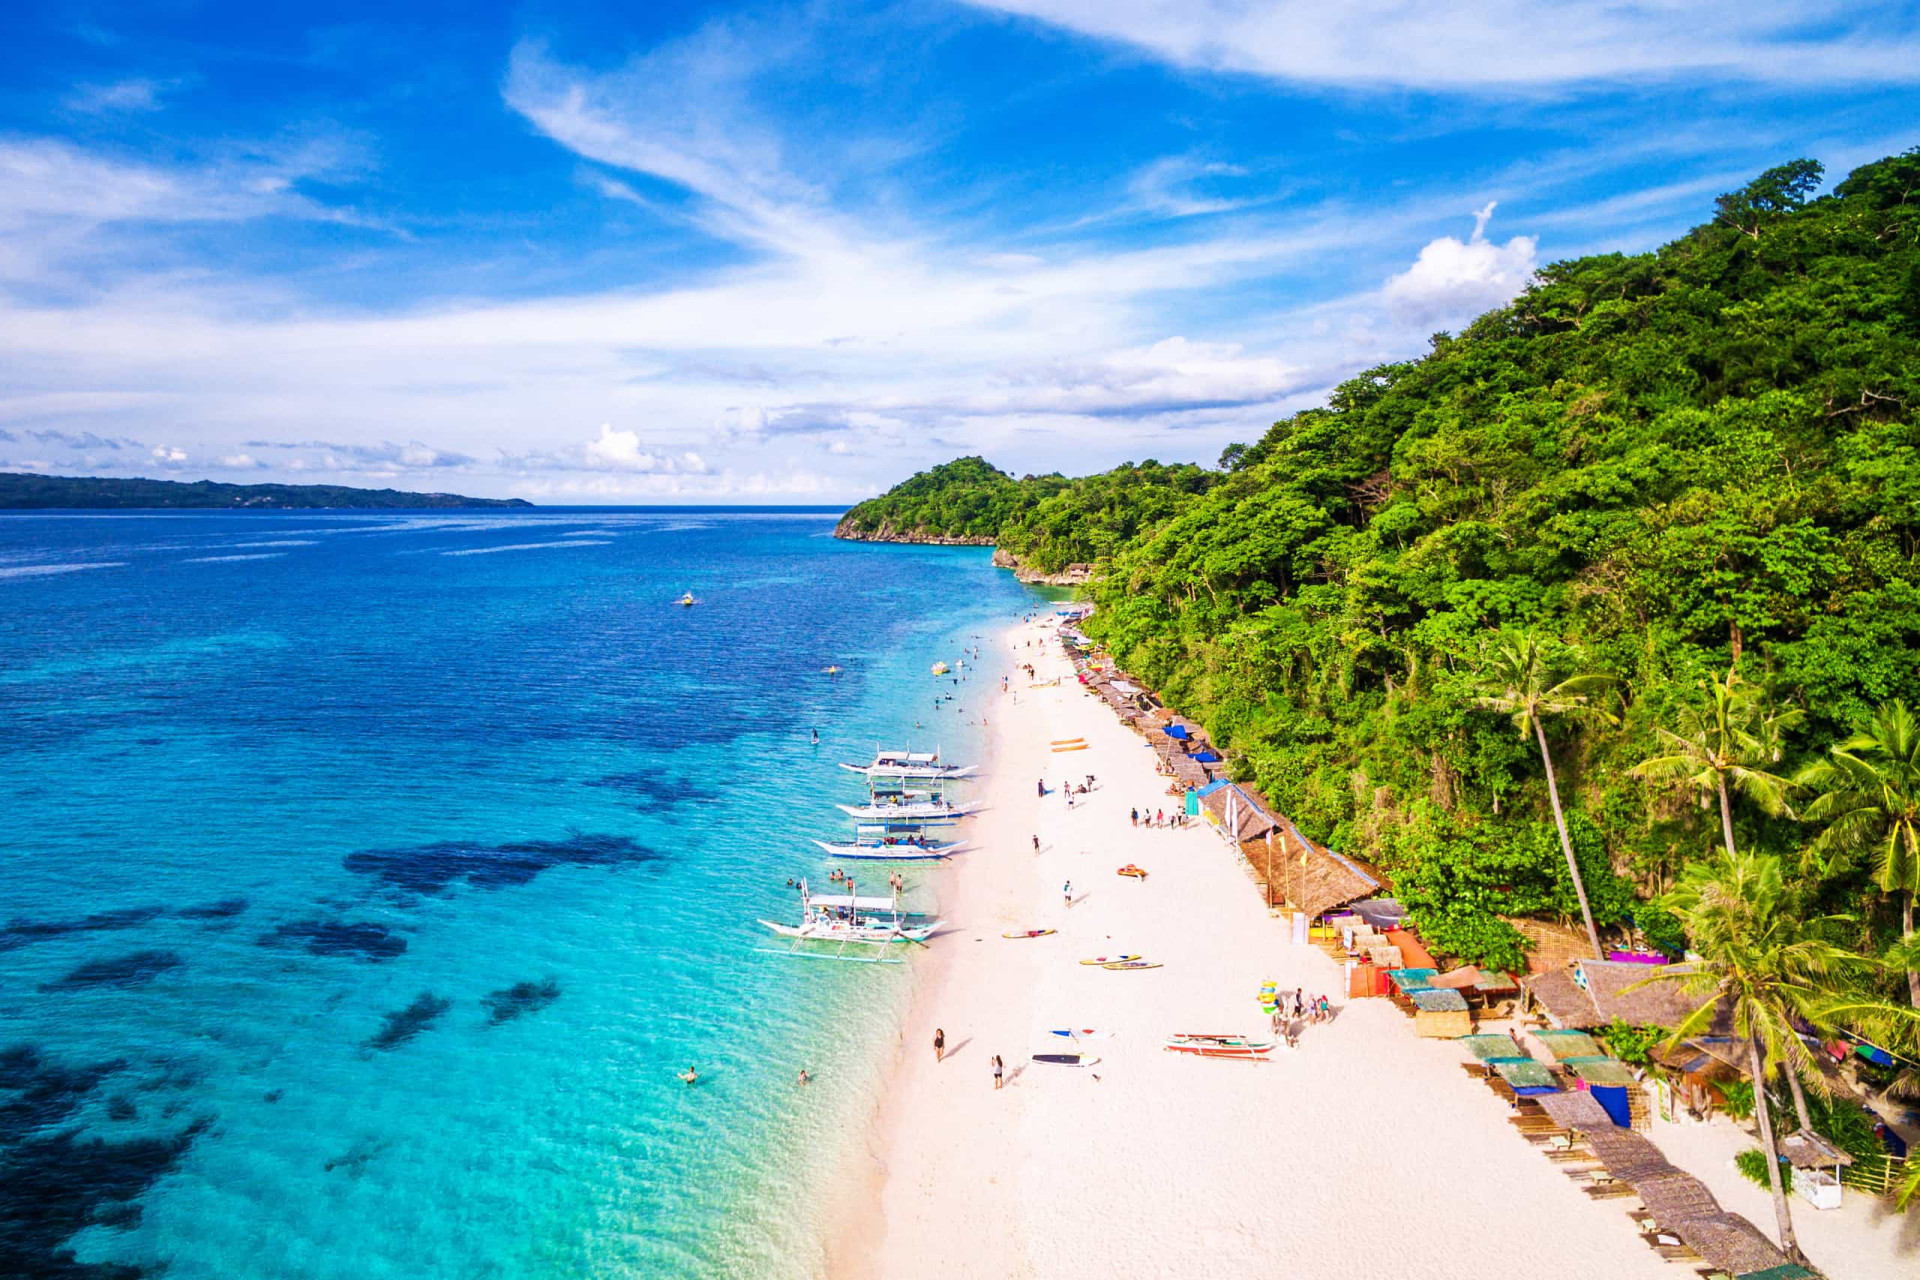 <p>In 2018, Philippines' president Rodrigo Duterte described the once-pristine island of Boracay as a "cesspool" in the wake of worsening environmental damage due to tourist overcrowding. The island was subsequently closed off to the public for six months. The destination has since reopened, but concerns are still being raised about the amount of businesses operating on Boracay.</p><p><a href="https://www.msn.com/en-my/community/channel/vid-7xx8mnucu55yw63we9va2gwr7uihbxwc68fxqp25x6tg4ftibpra?cvid=94631541bc0f4f89bfd59158d696ad7e">Follow us and access great exclusive content every day</a></p>